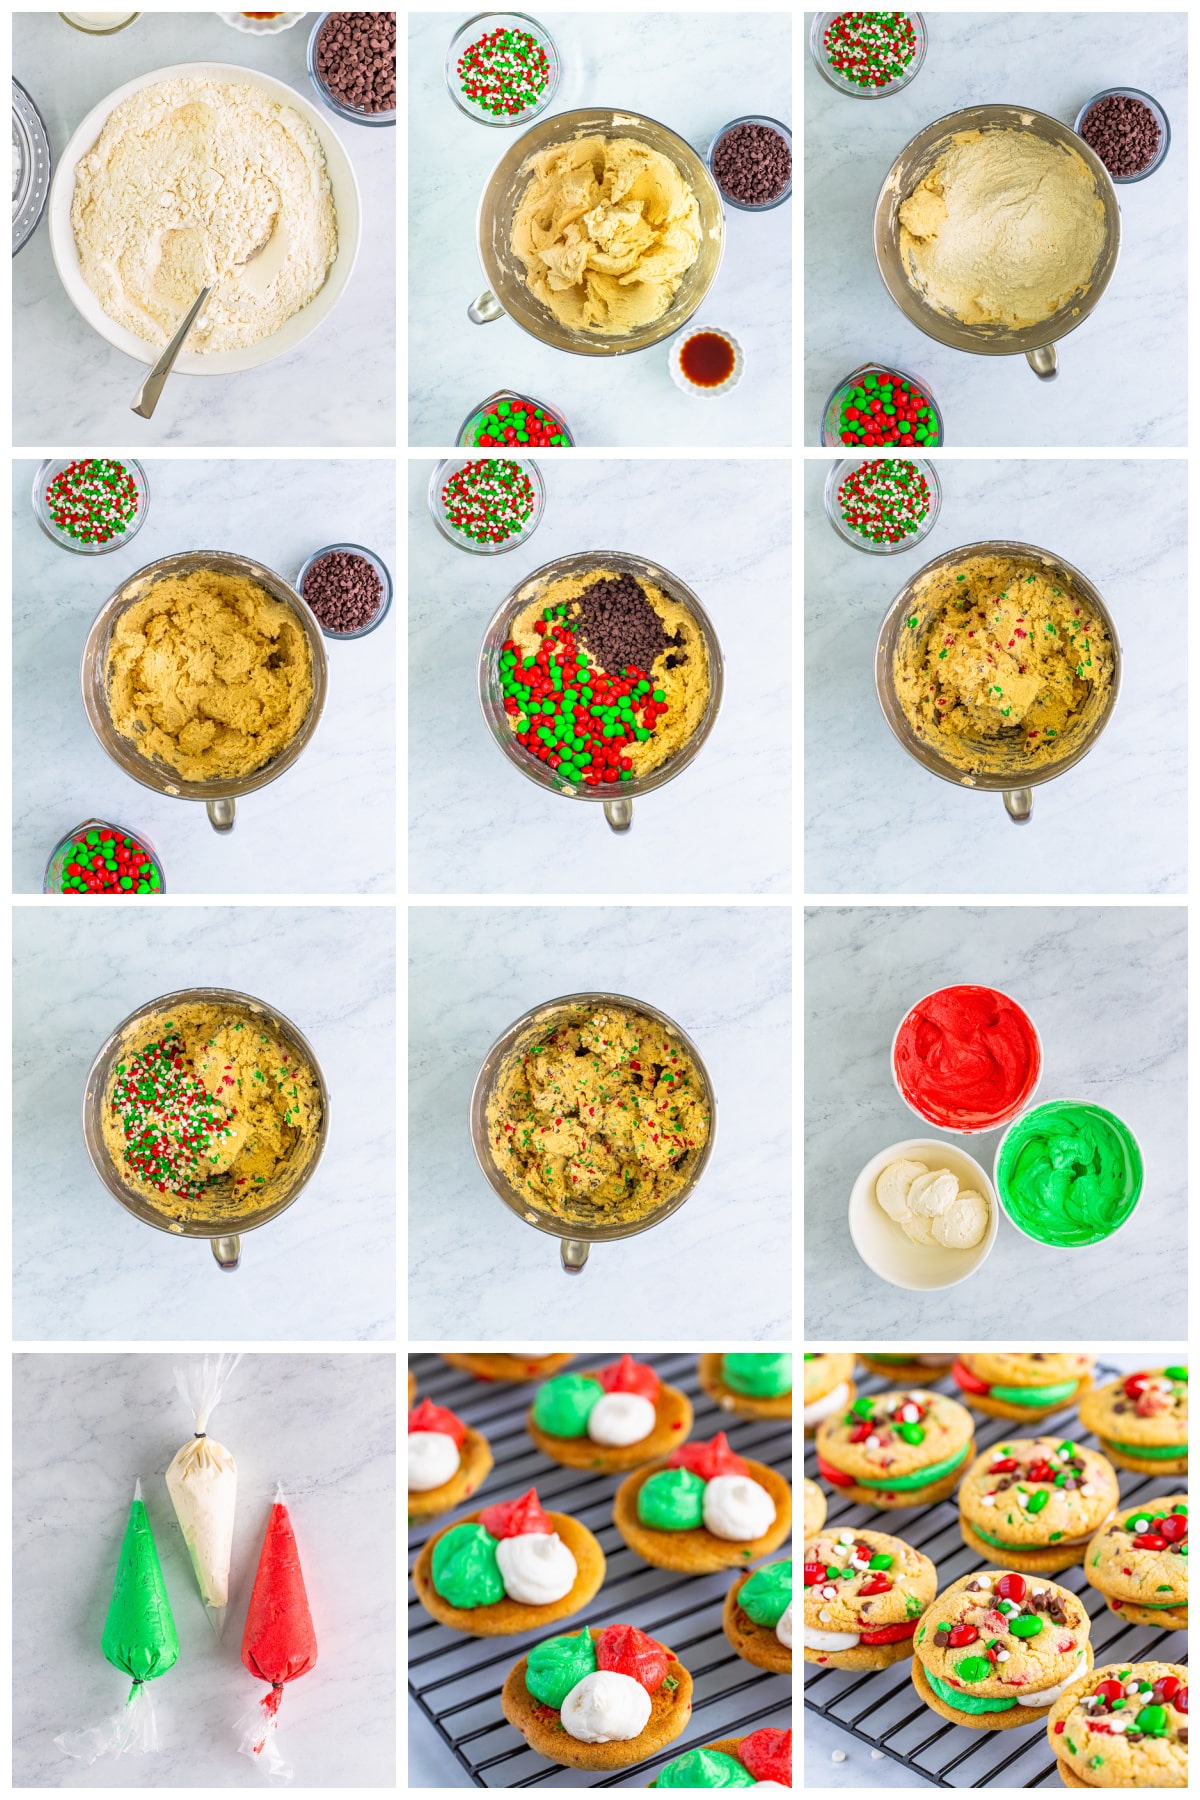 Step by step photos on how to make Christmas Sandwich Cookies.